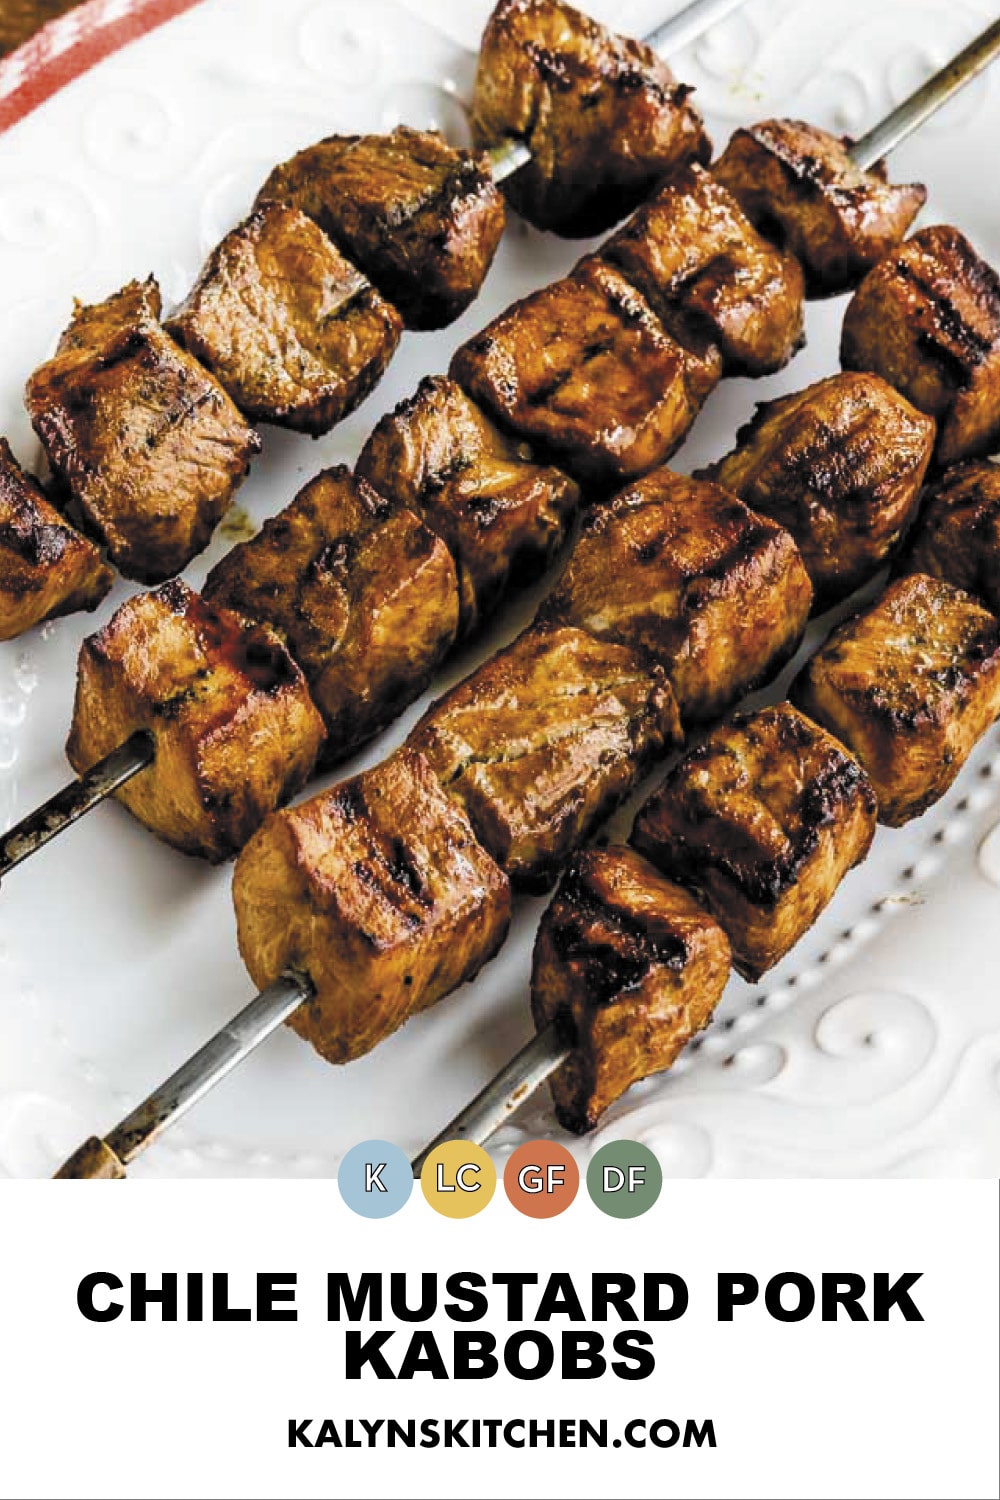 Chile Mustard Pork Kabobs have an interesting marinade that adds amazing flavor to the pork, and this recipe is extra low in carbs! And pork kabobs are fun for a different take on grilled meat on a stick! [found on KalynsKitchen.com] #ChiliMustardPorkKabobs #PorkKabobs